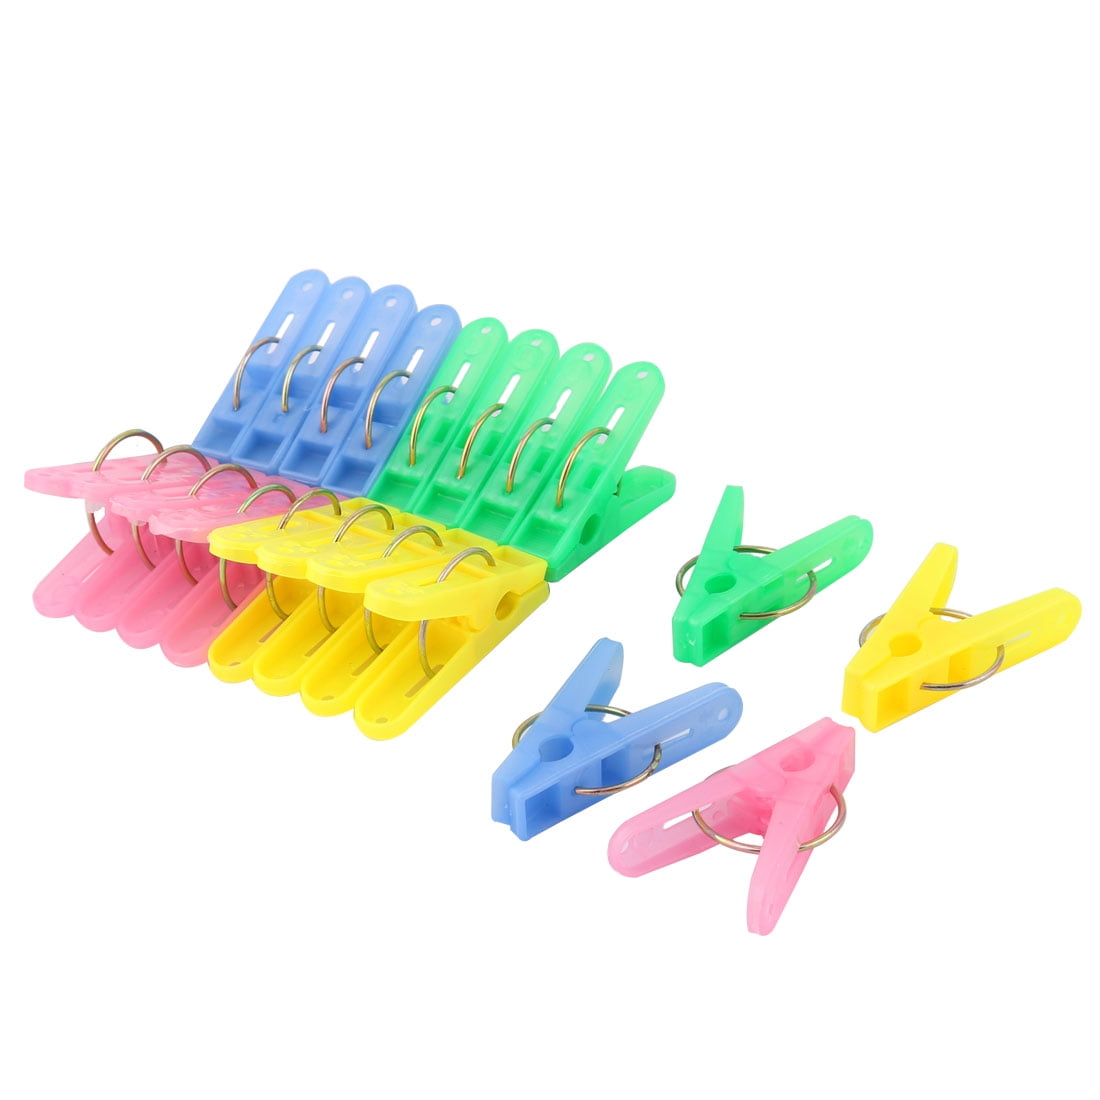 Product Weight: 83g; Color: Blue,Green,Pink,Yellow Material: Plastic ...